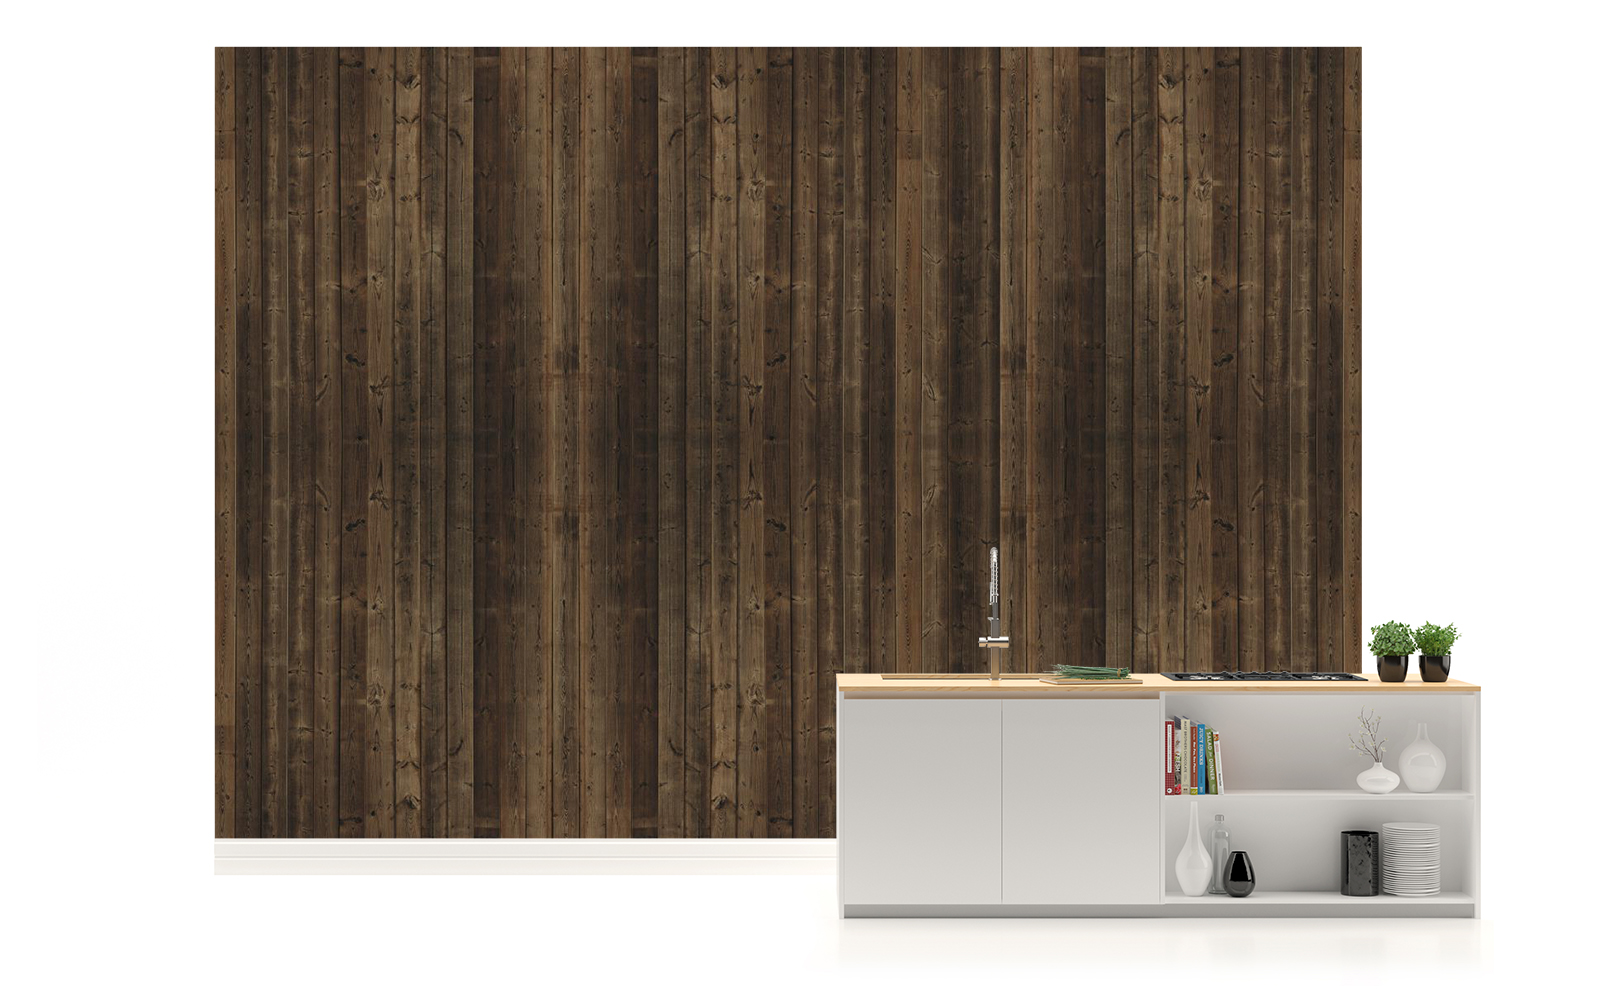 About Wood Planks Texture Photo Wallpaper Wall Mural Room 1089p